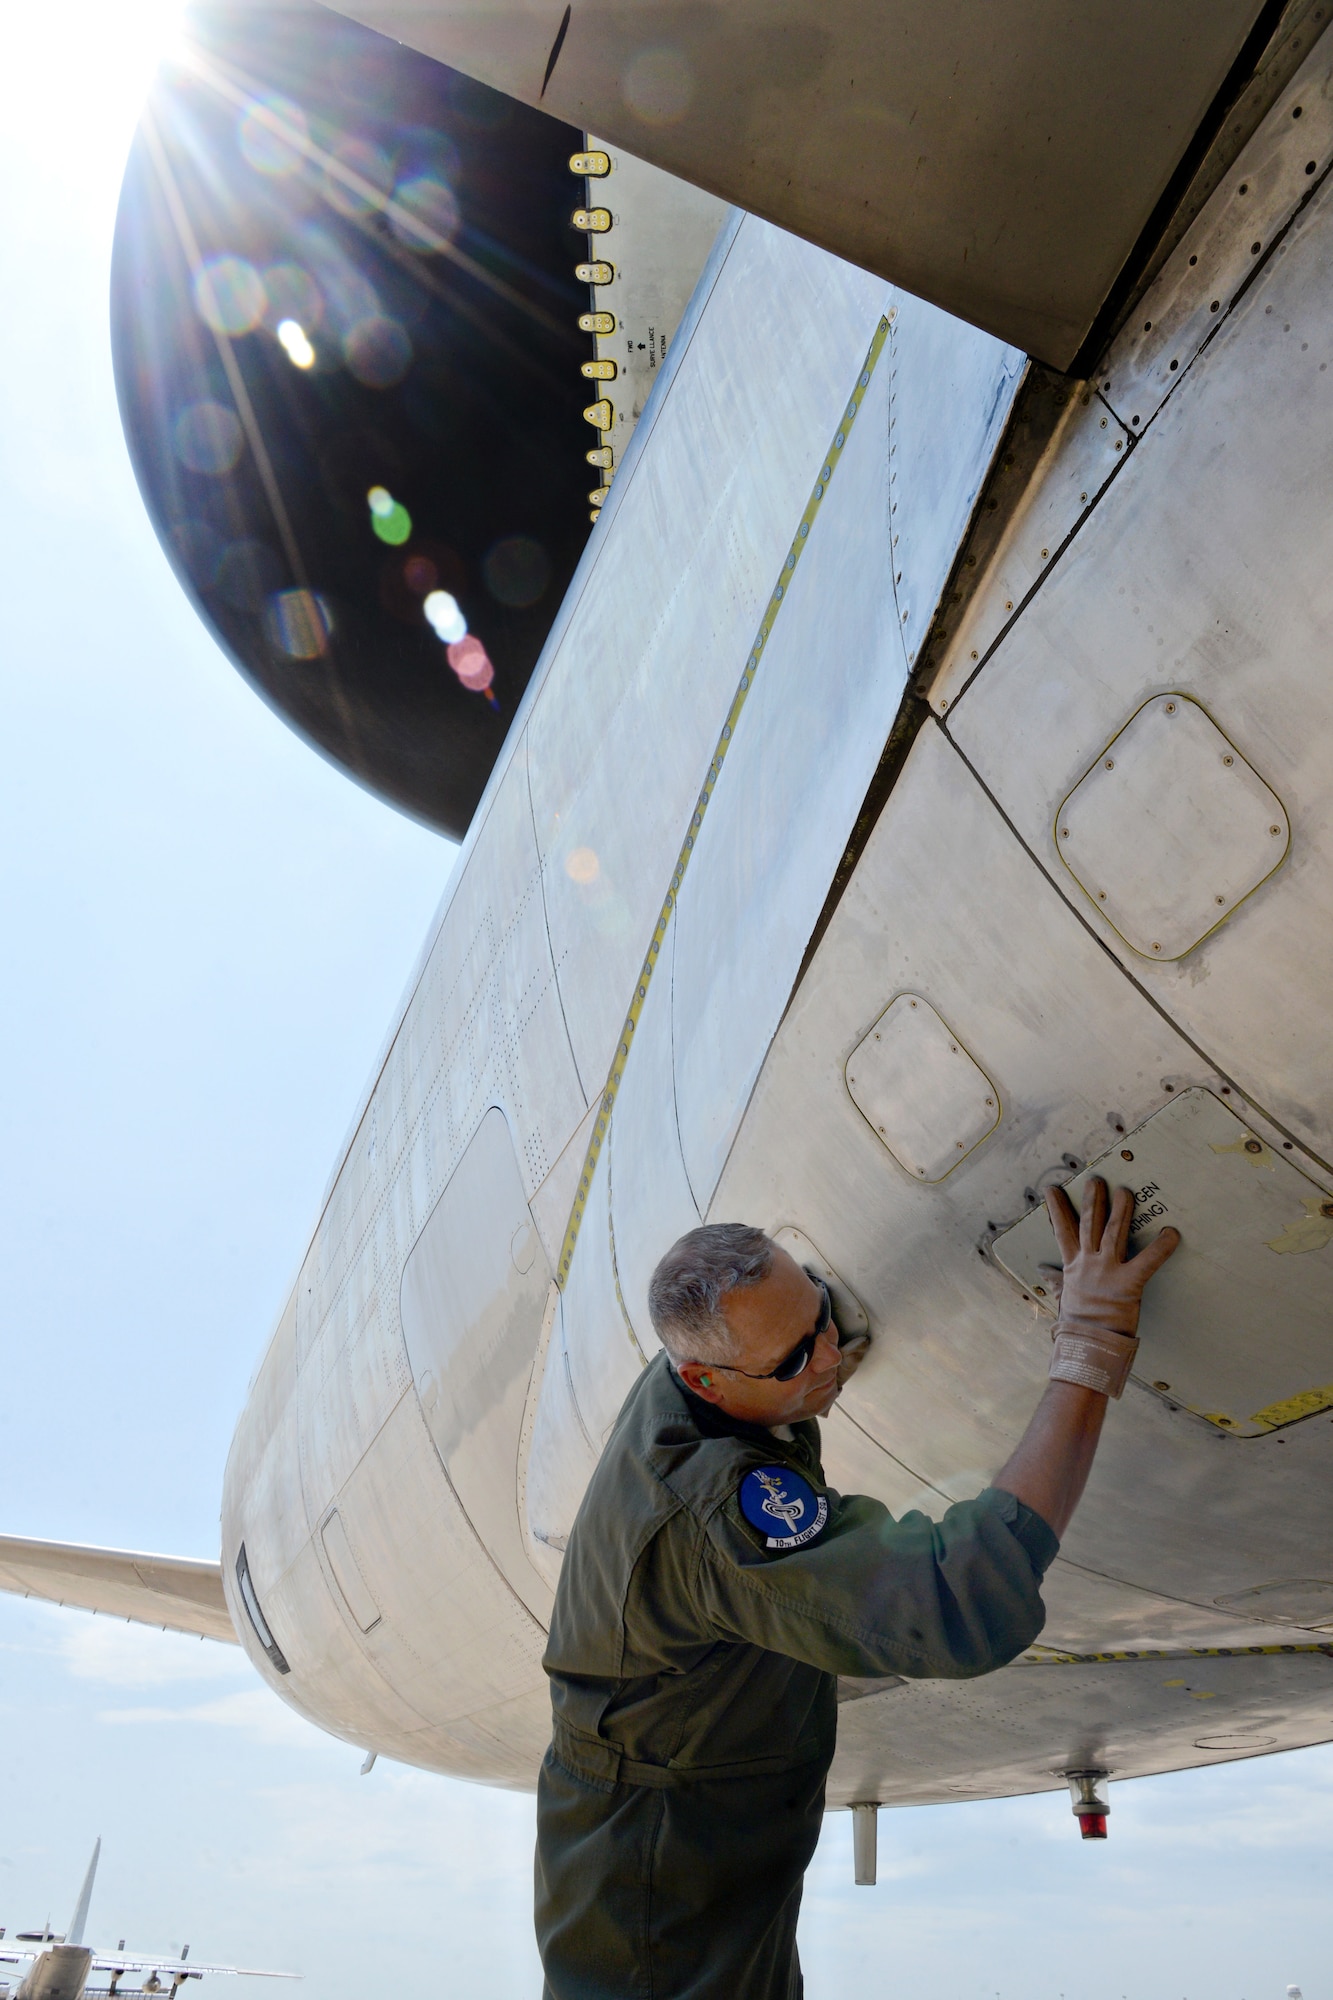 Senior Master Sgt. Tim Brown, an E-3 flight engineer with the 10th Flight Test Squadron, checks the general condition of the AWACS, inside and out, before flights. (Air Force photo by Kelly White/Released)